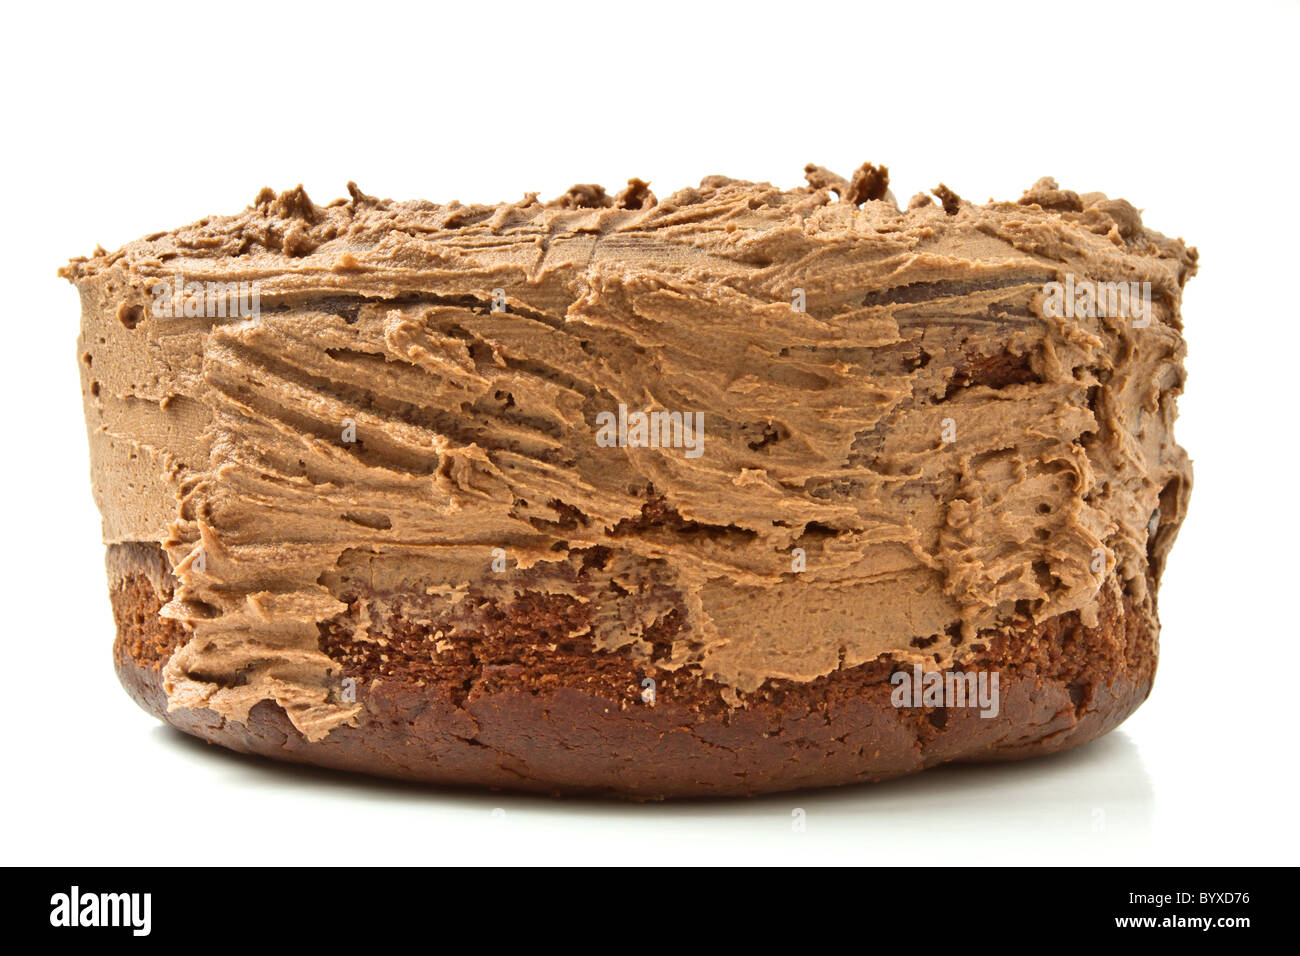 Reduced Fat chocolate Cake made with mayonnaise and no eggs or butter. Stock Photo